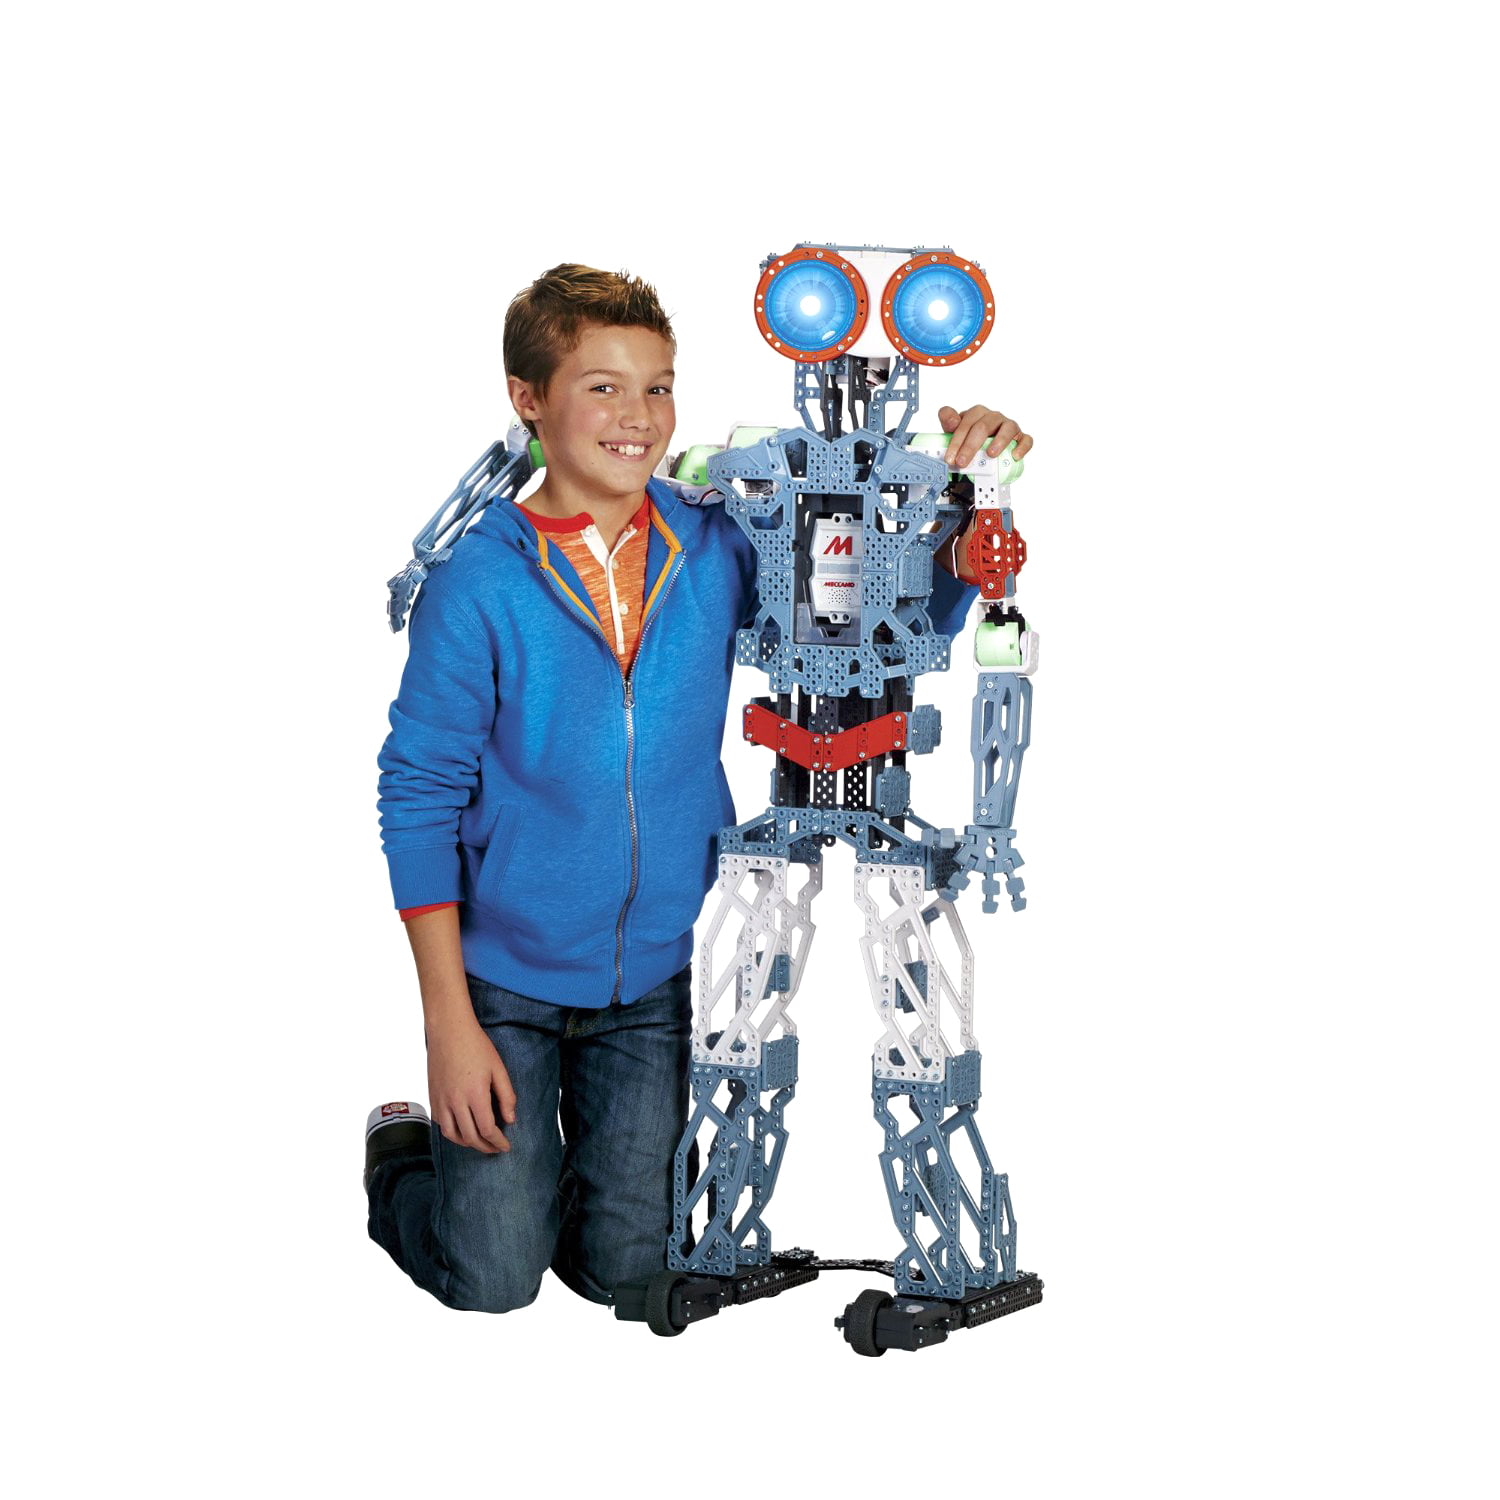 Meccano MeccaNoid G15 Personal Robot 2 Feet Tall for sale online